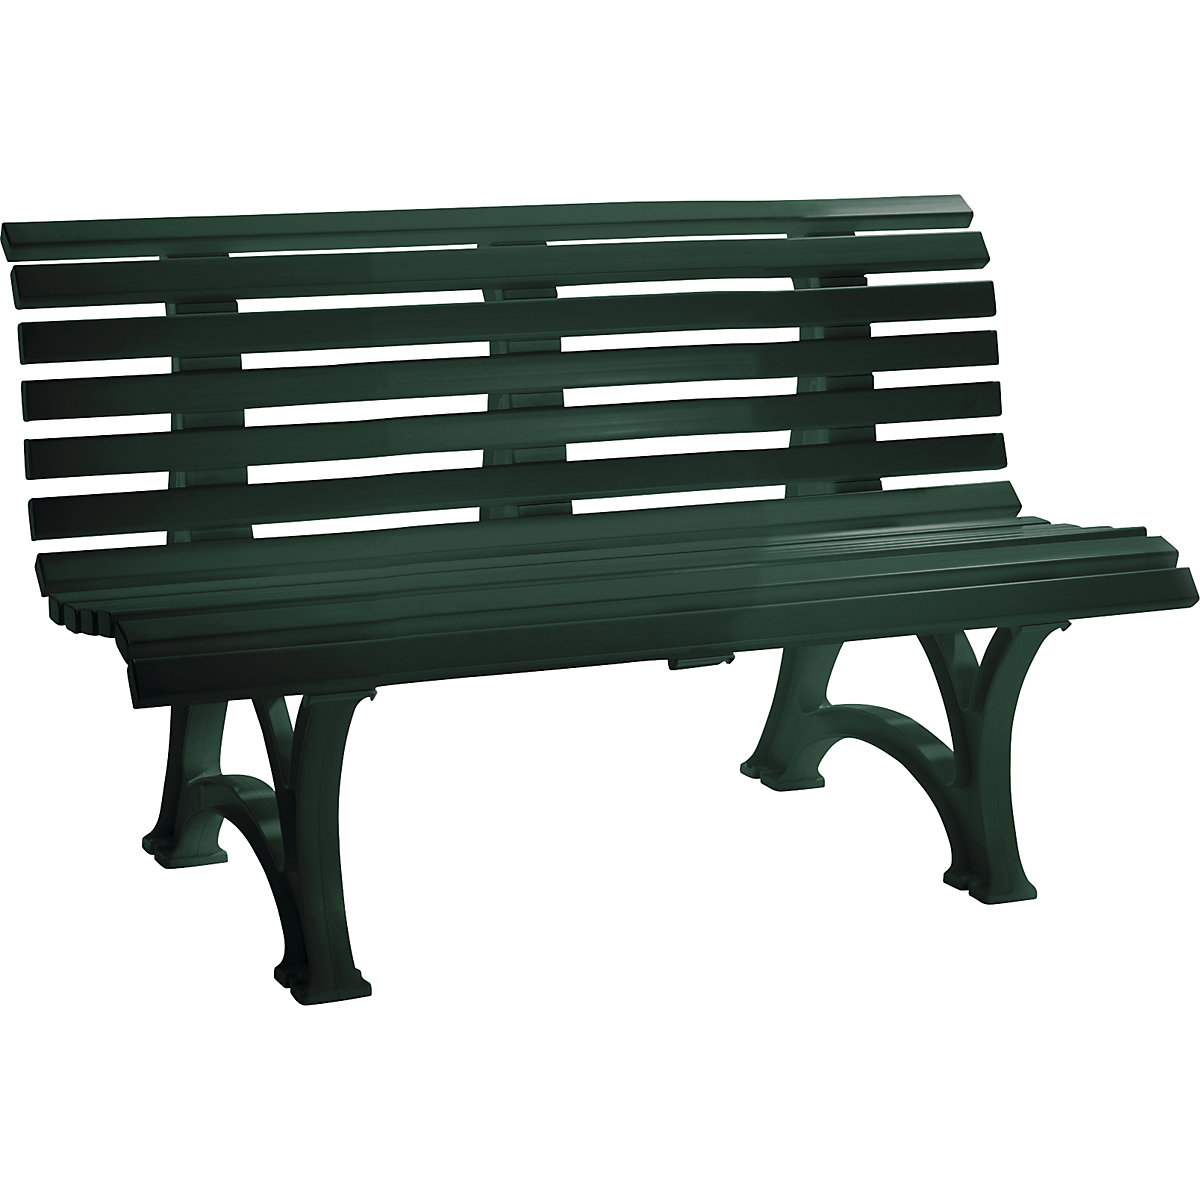 Park bench made of plastic, with 13 slats, width 1500 mm, moss green-7